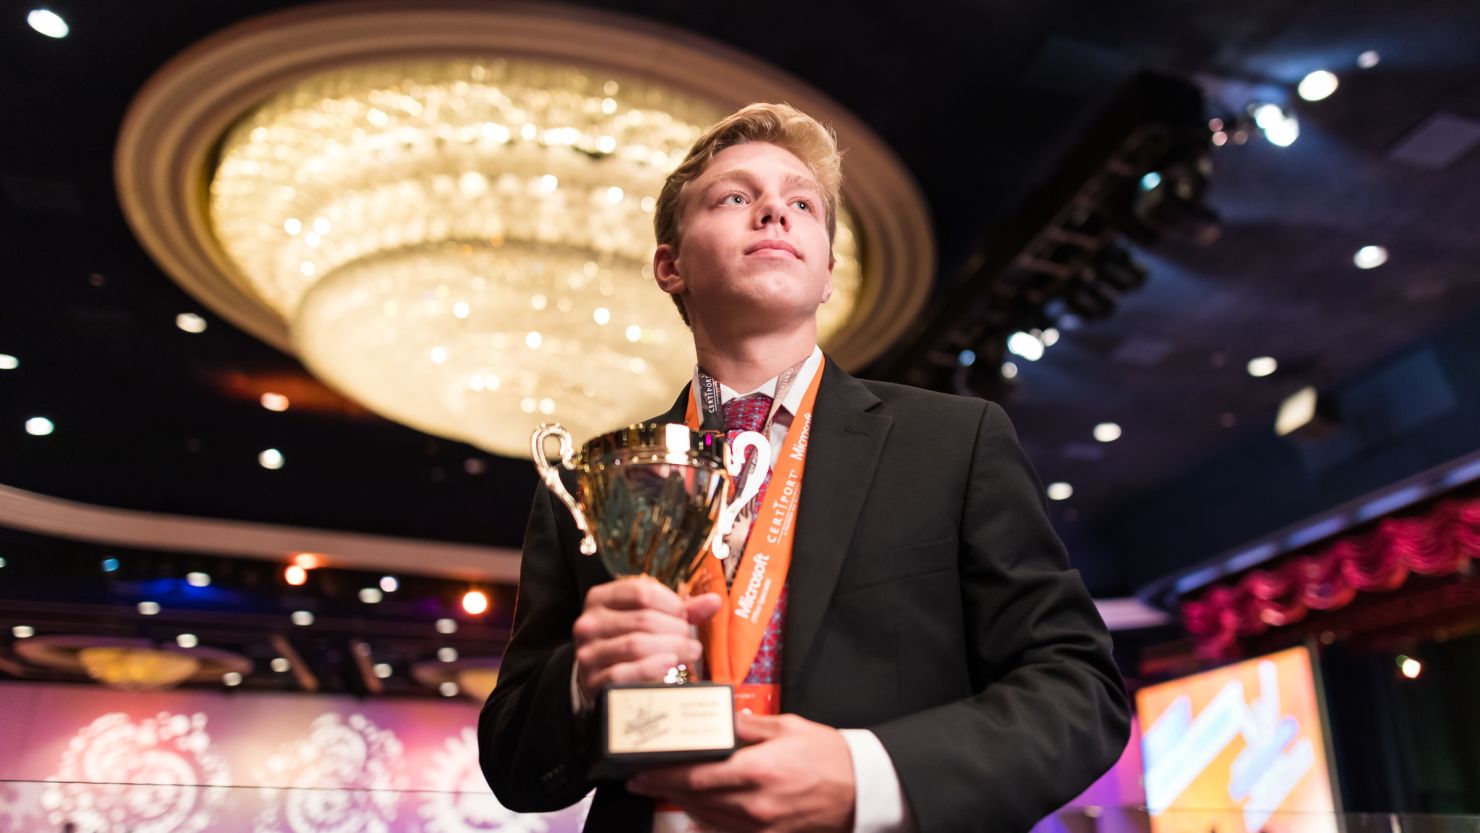 John Dumoulin, a 17-year-old high school student, was crowned Microsoft Excel 2016 world champion.